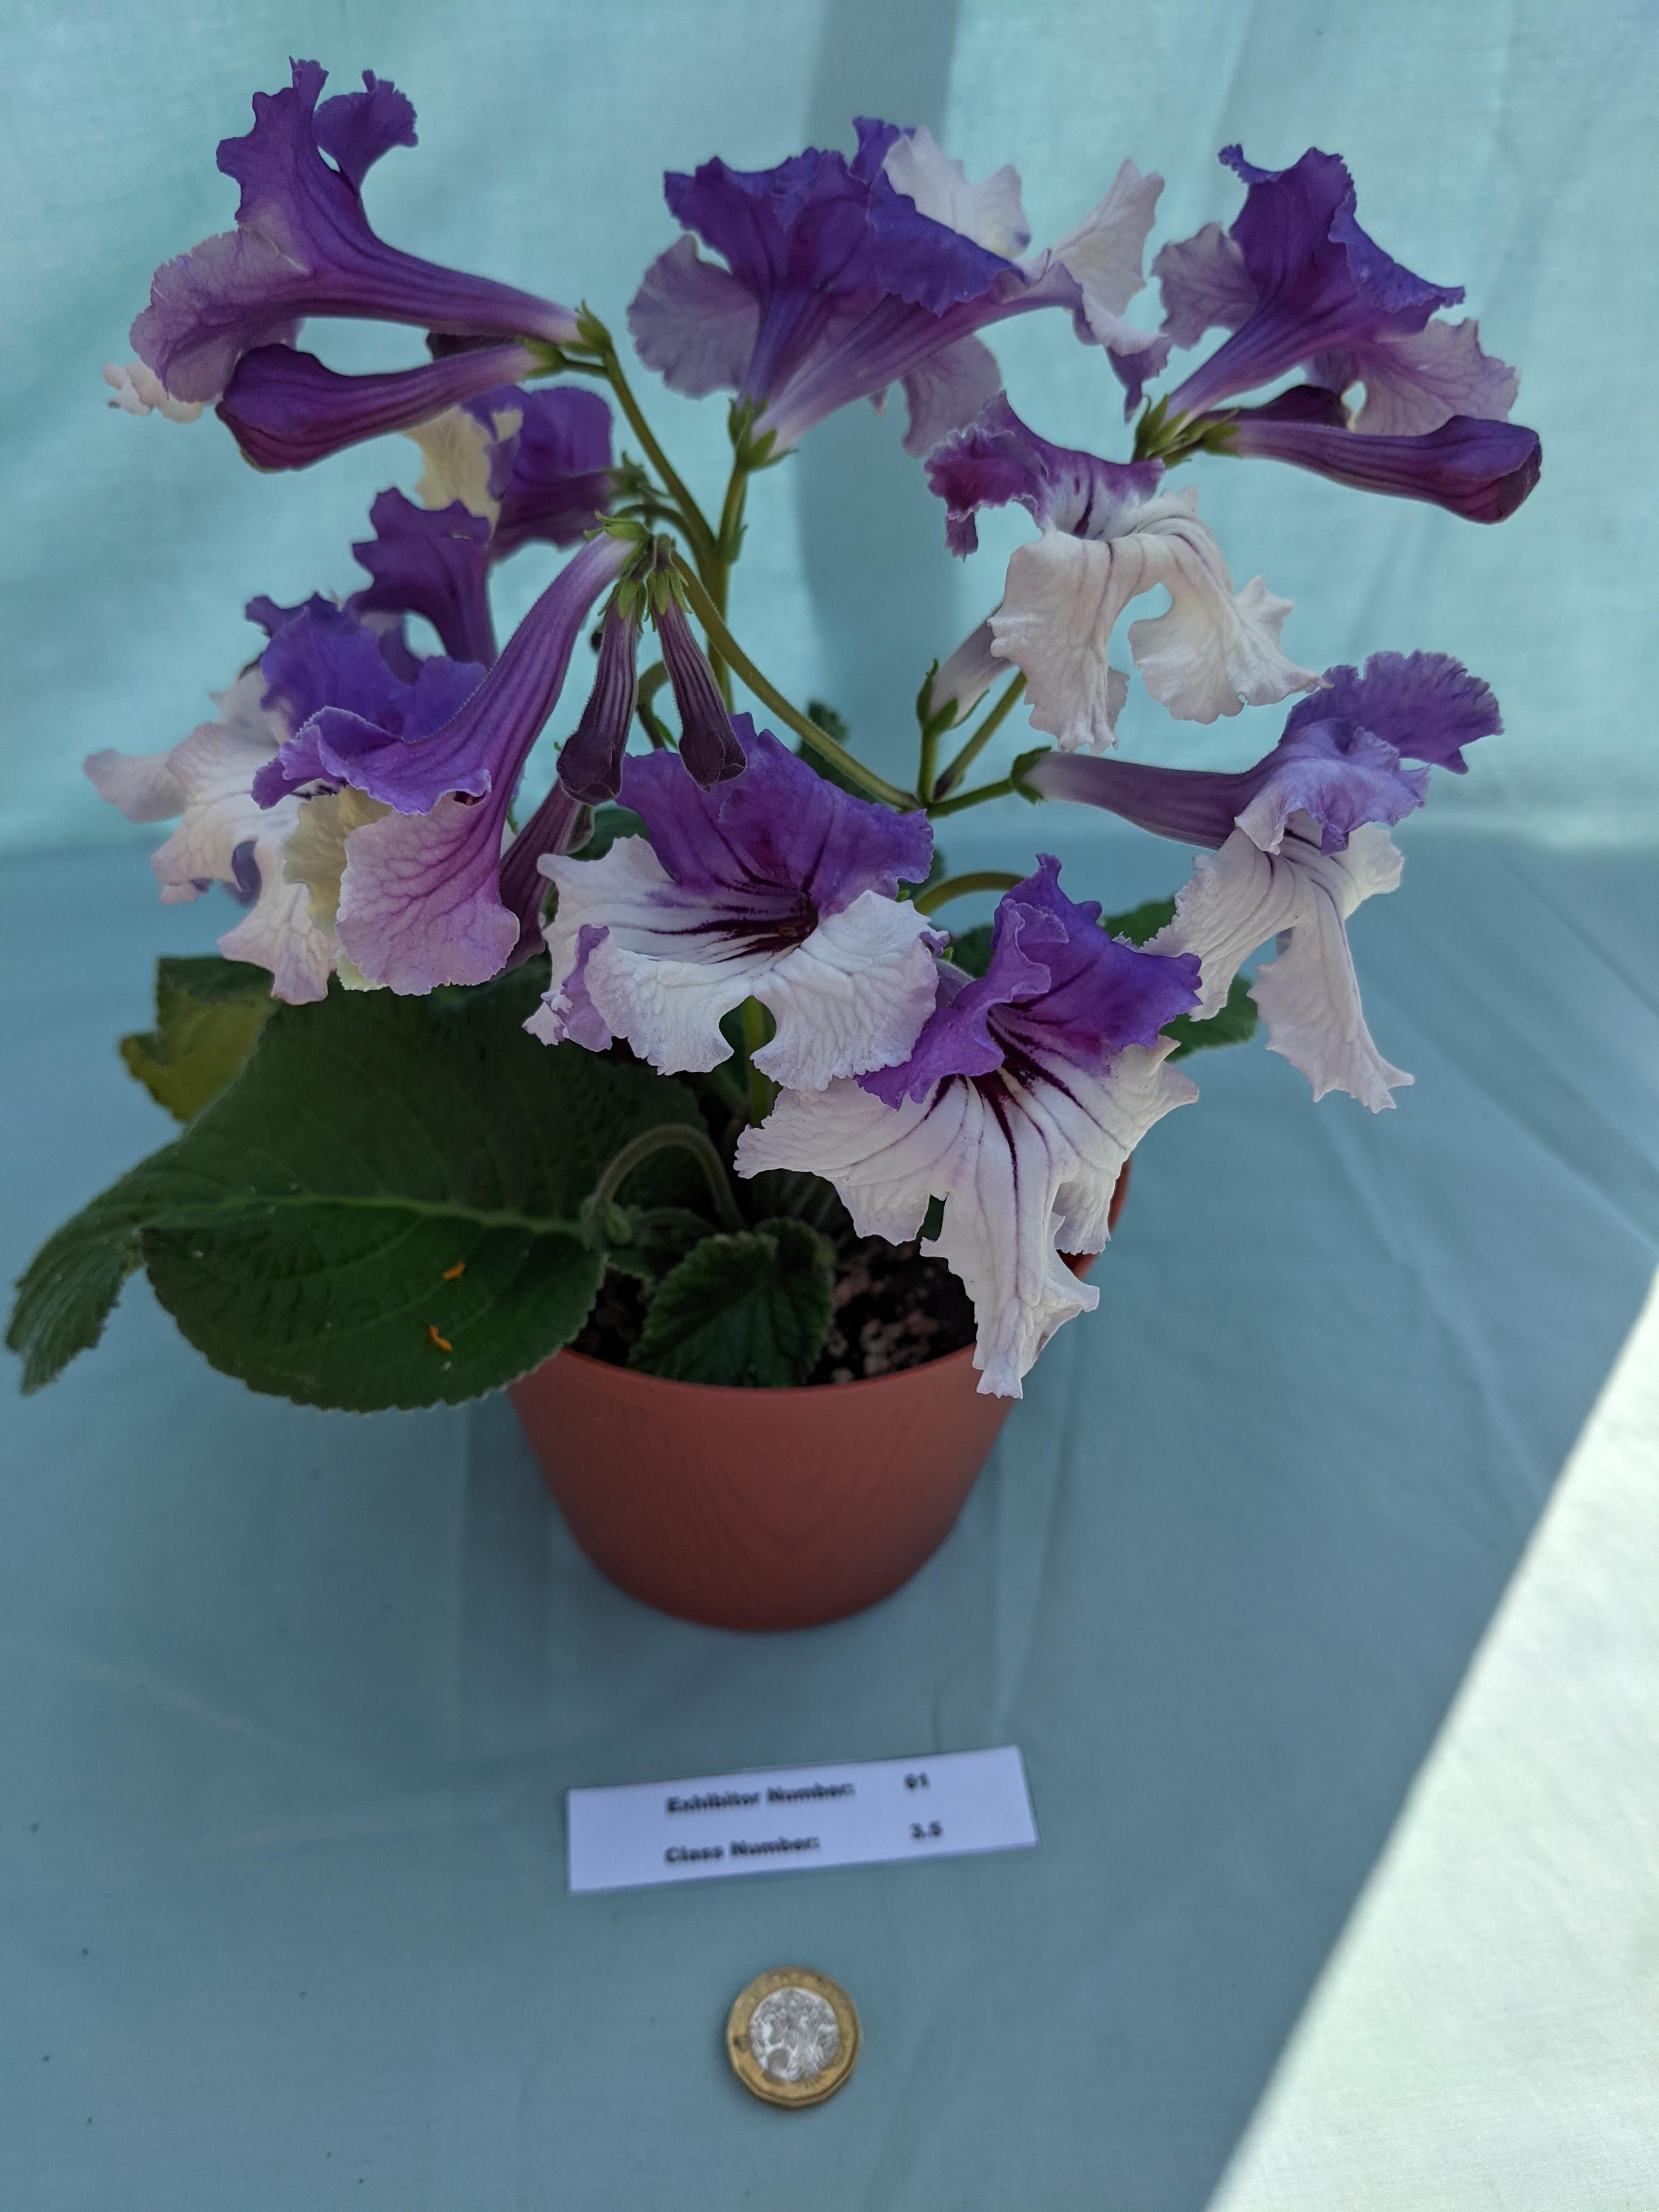 Best in Section Rosette: Awarded to A Davidson for his entry in Class 3.5: 1 pot plant in flower